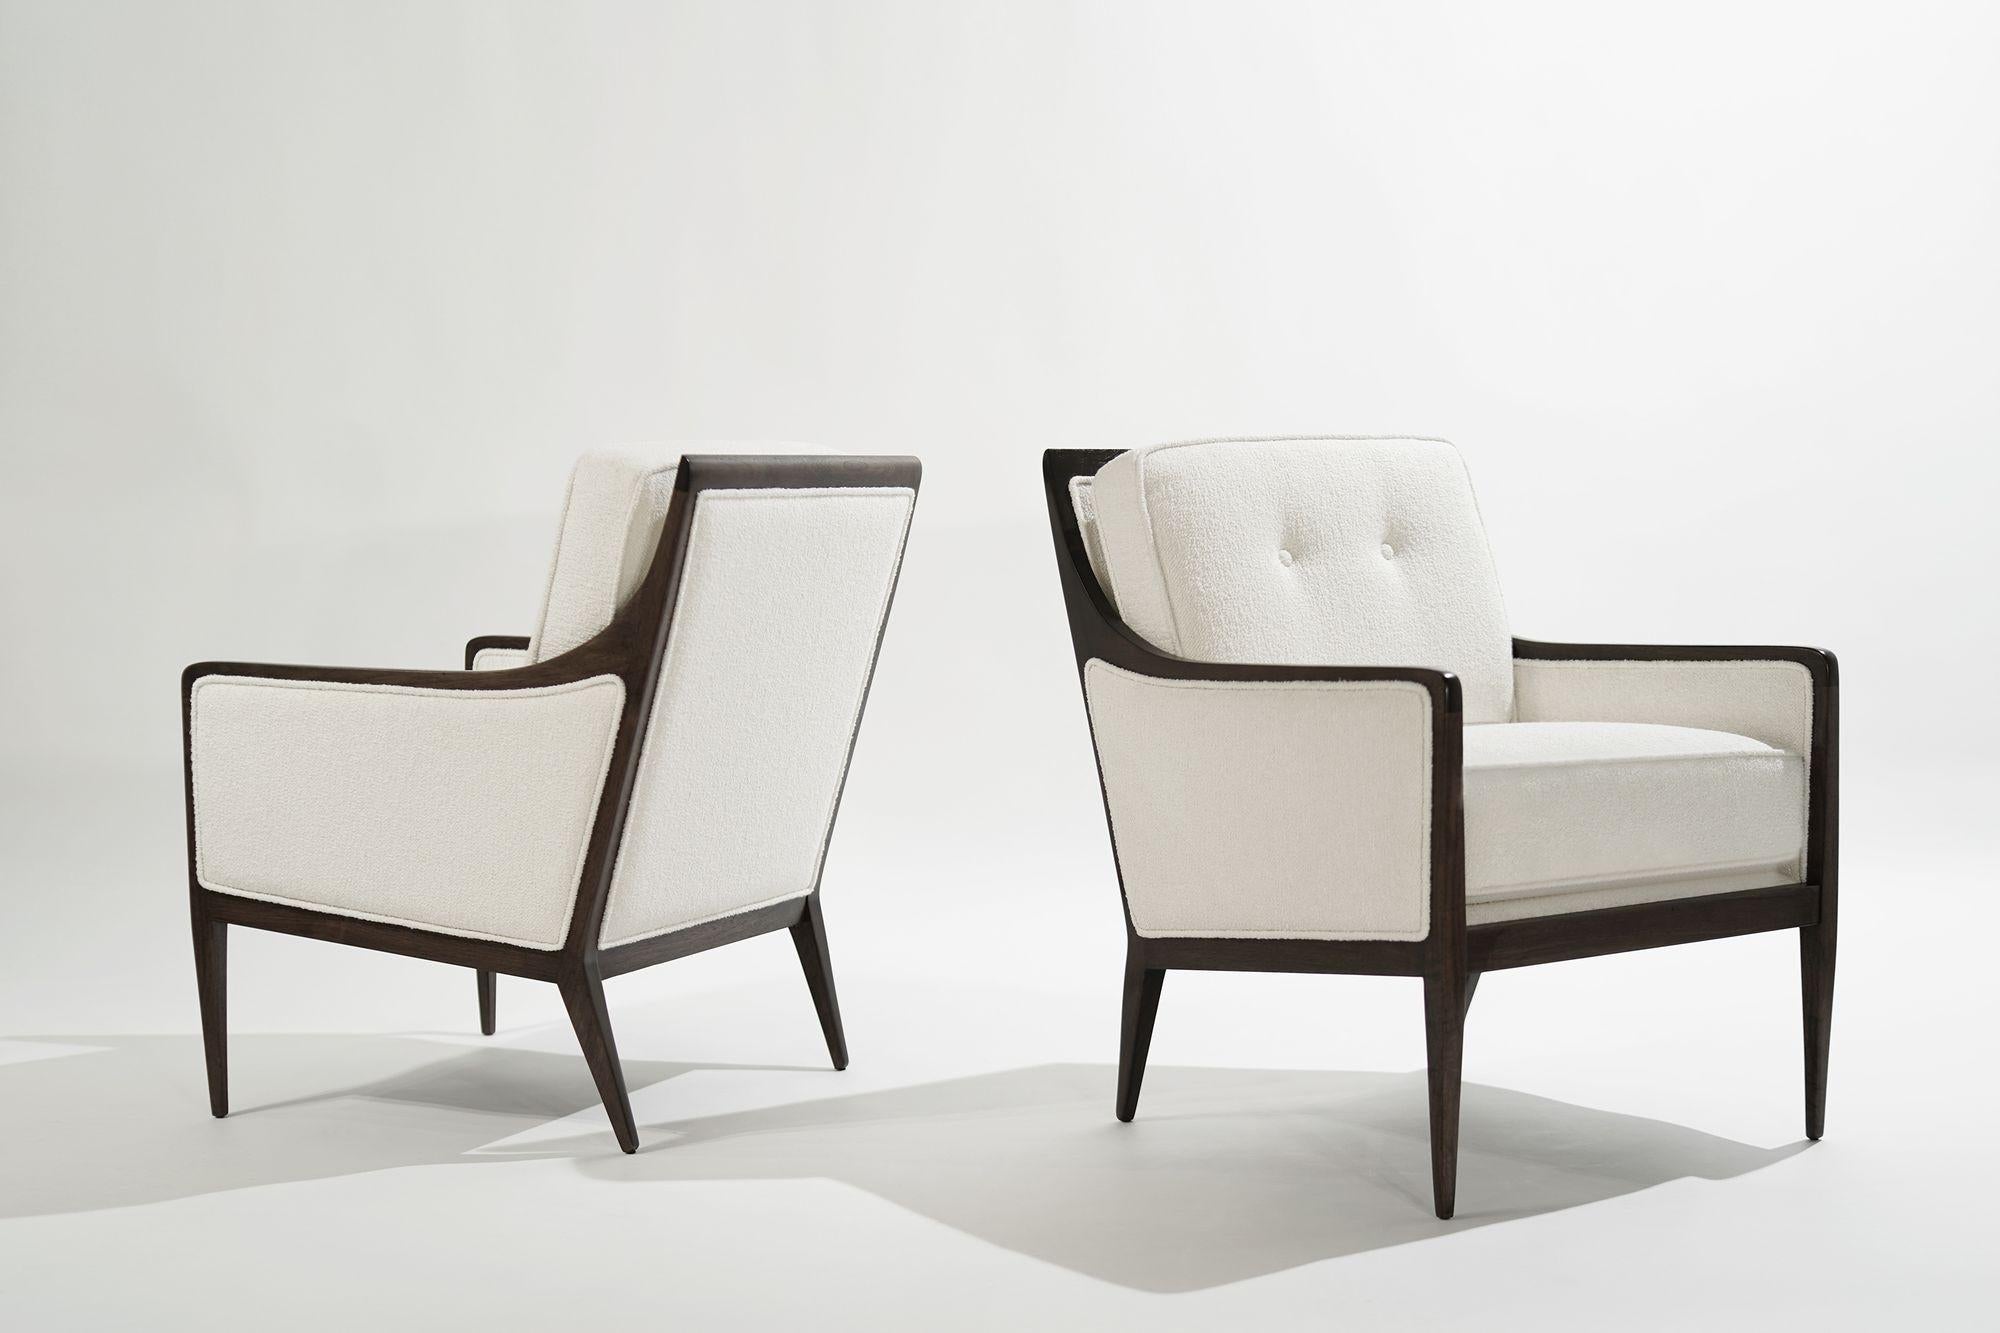 20th Century Set of Lounge Chairs by Milo Baughman, Country Village Collection, C. 1950s For Sale